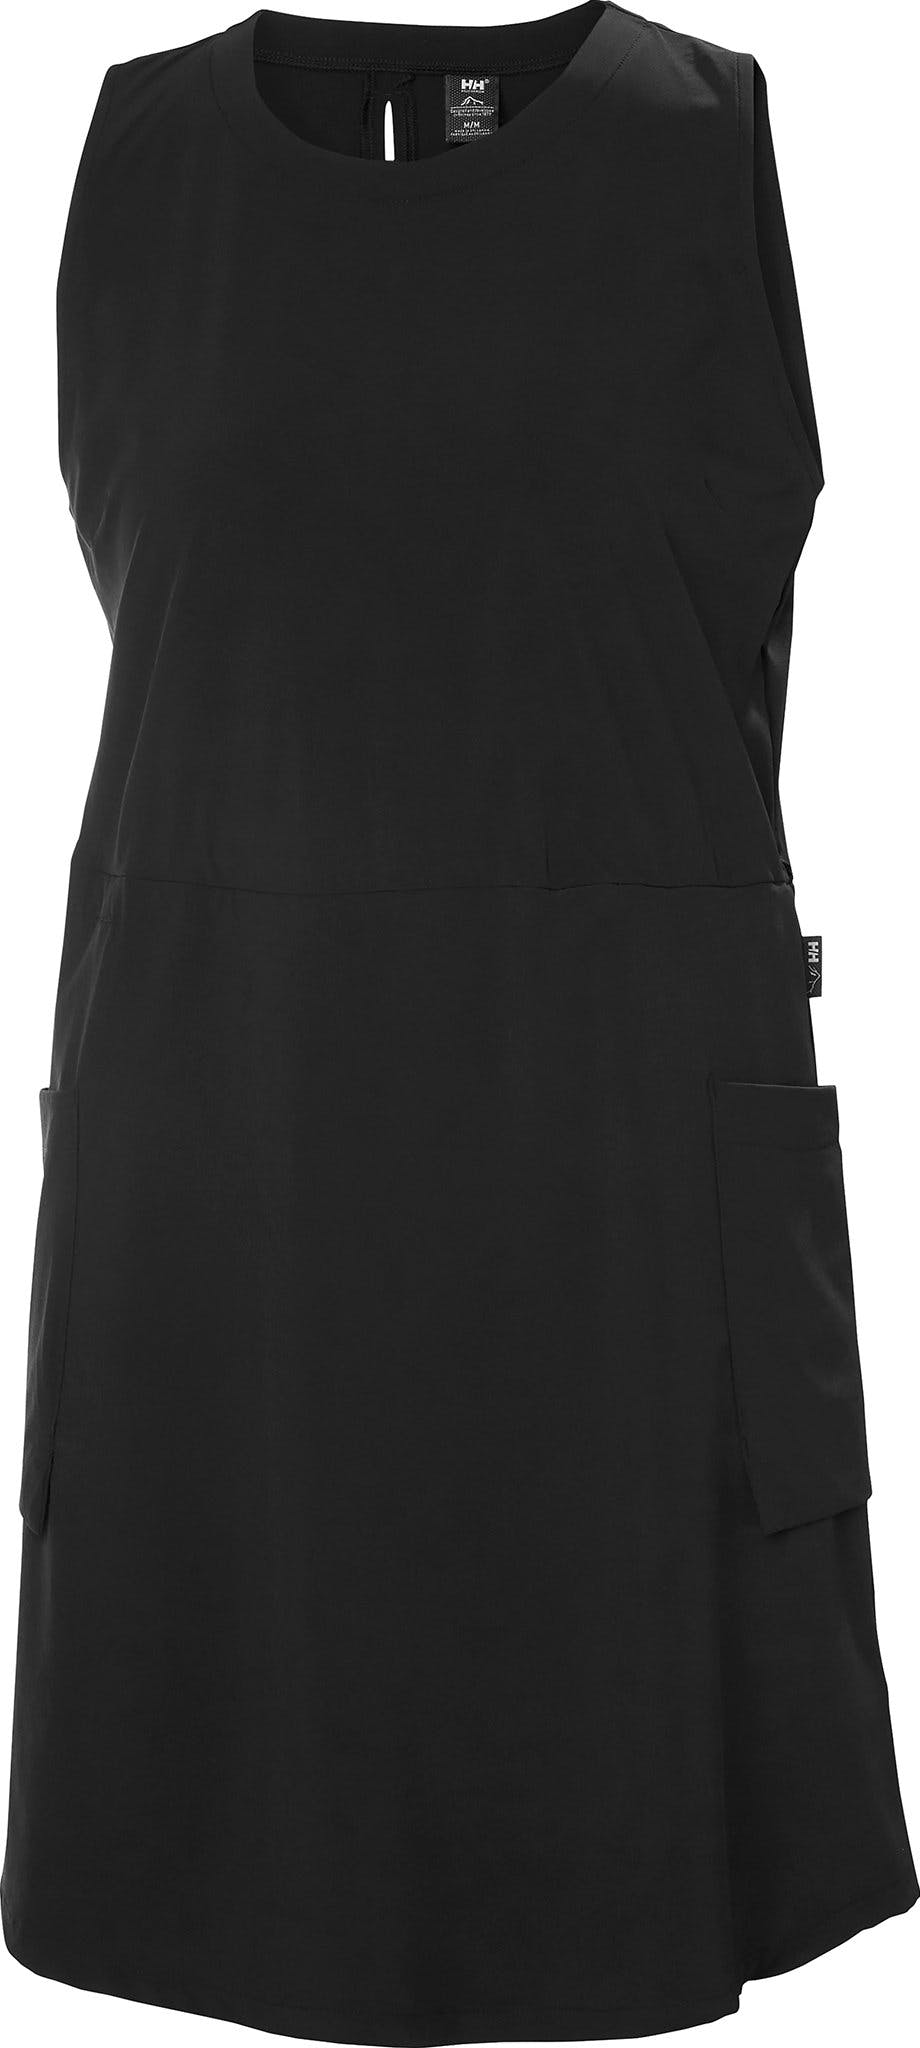 Product image for Viken Recycled Dress - Women's